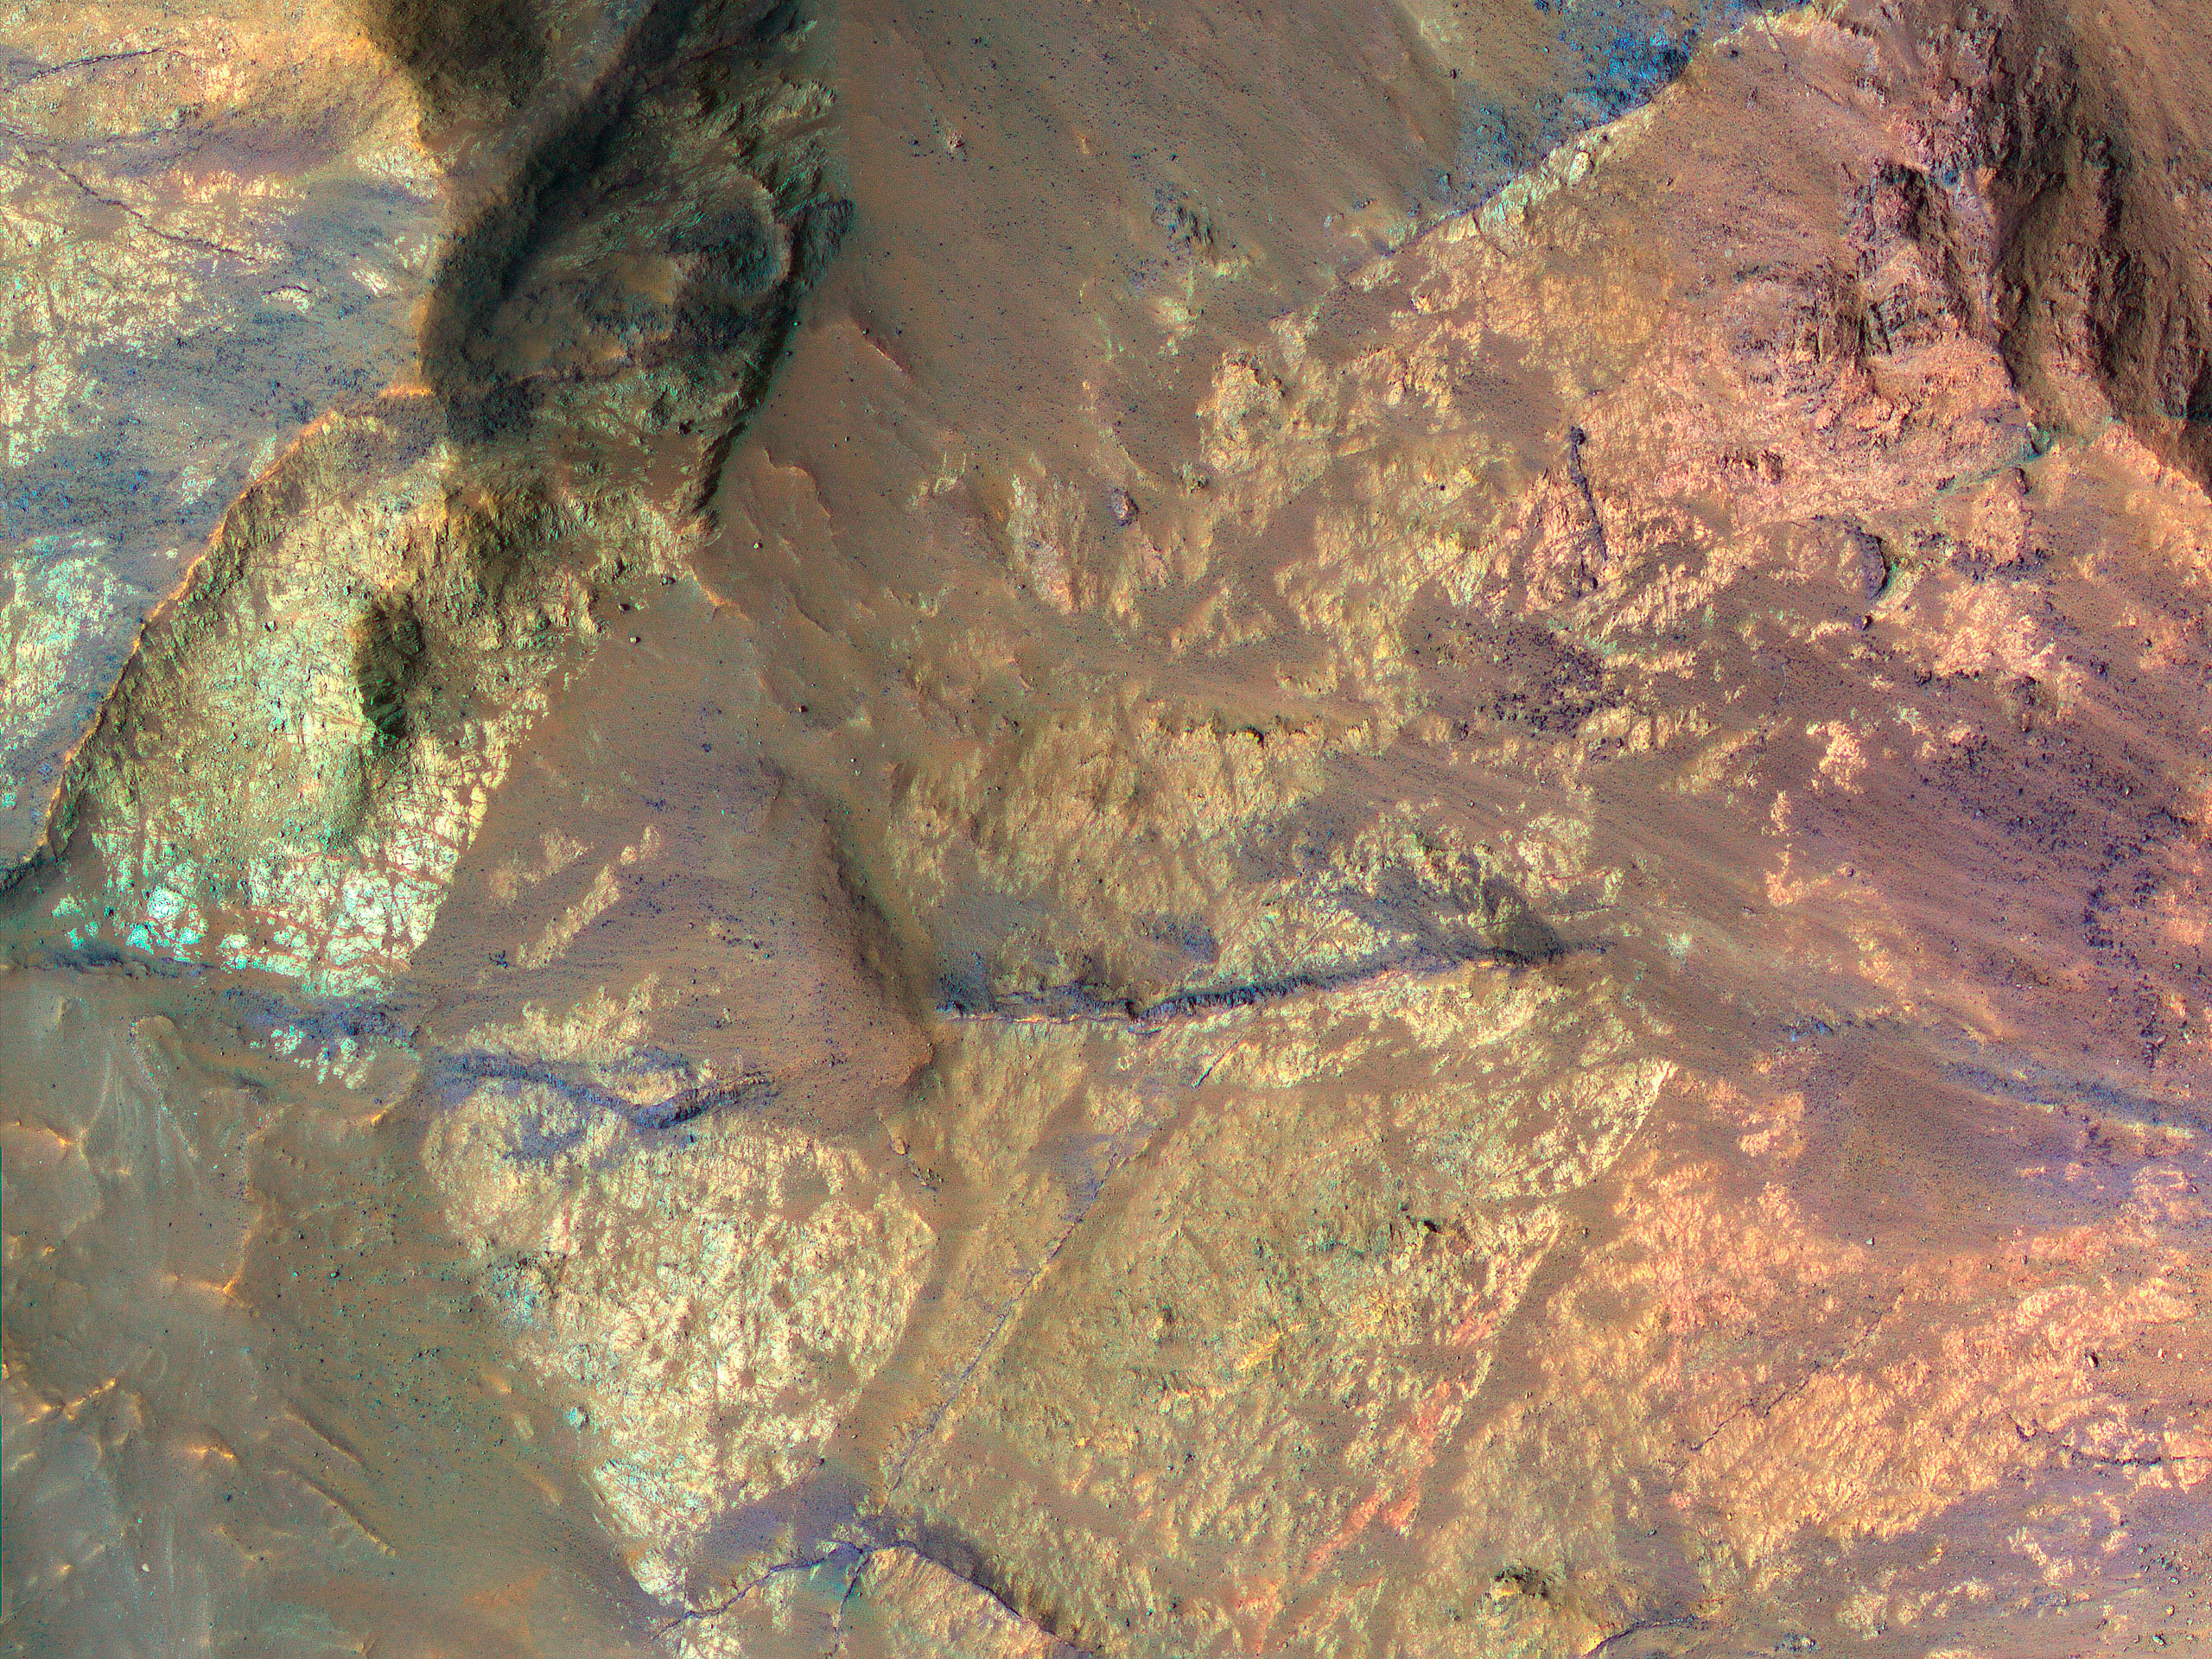 Light-Toned Materials on the Floor of Coprates Chasma